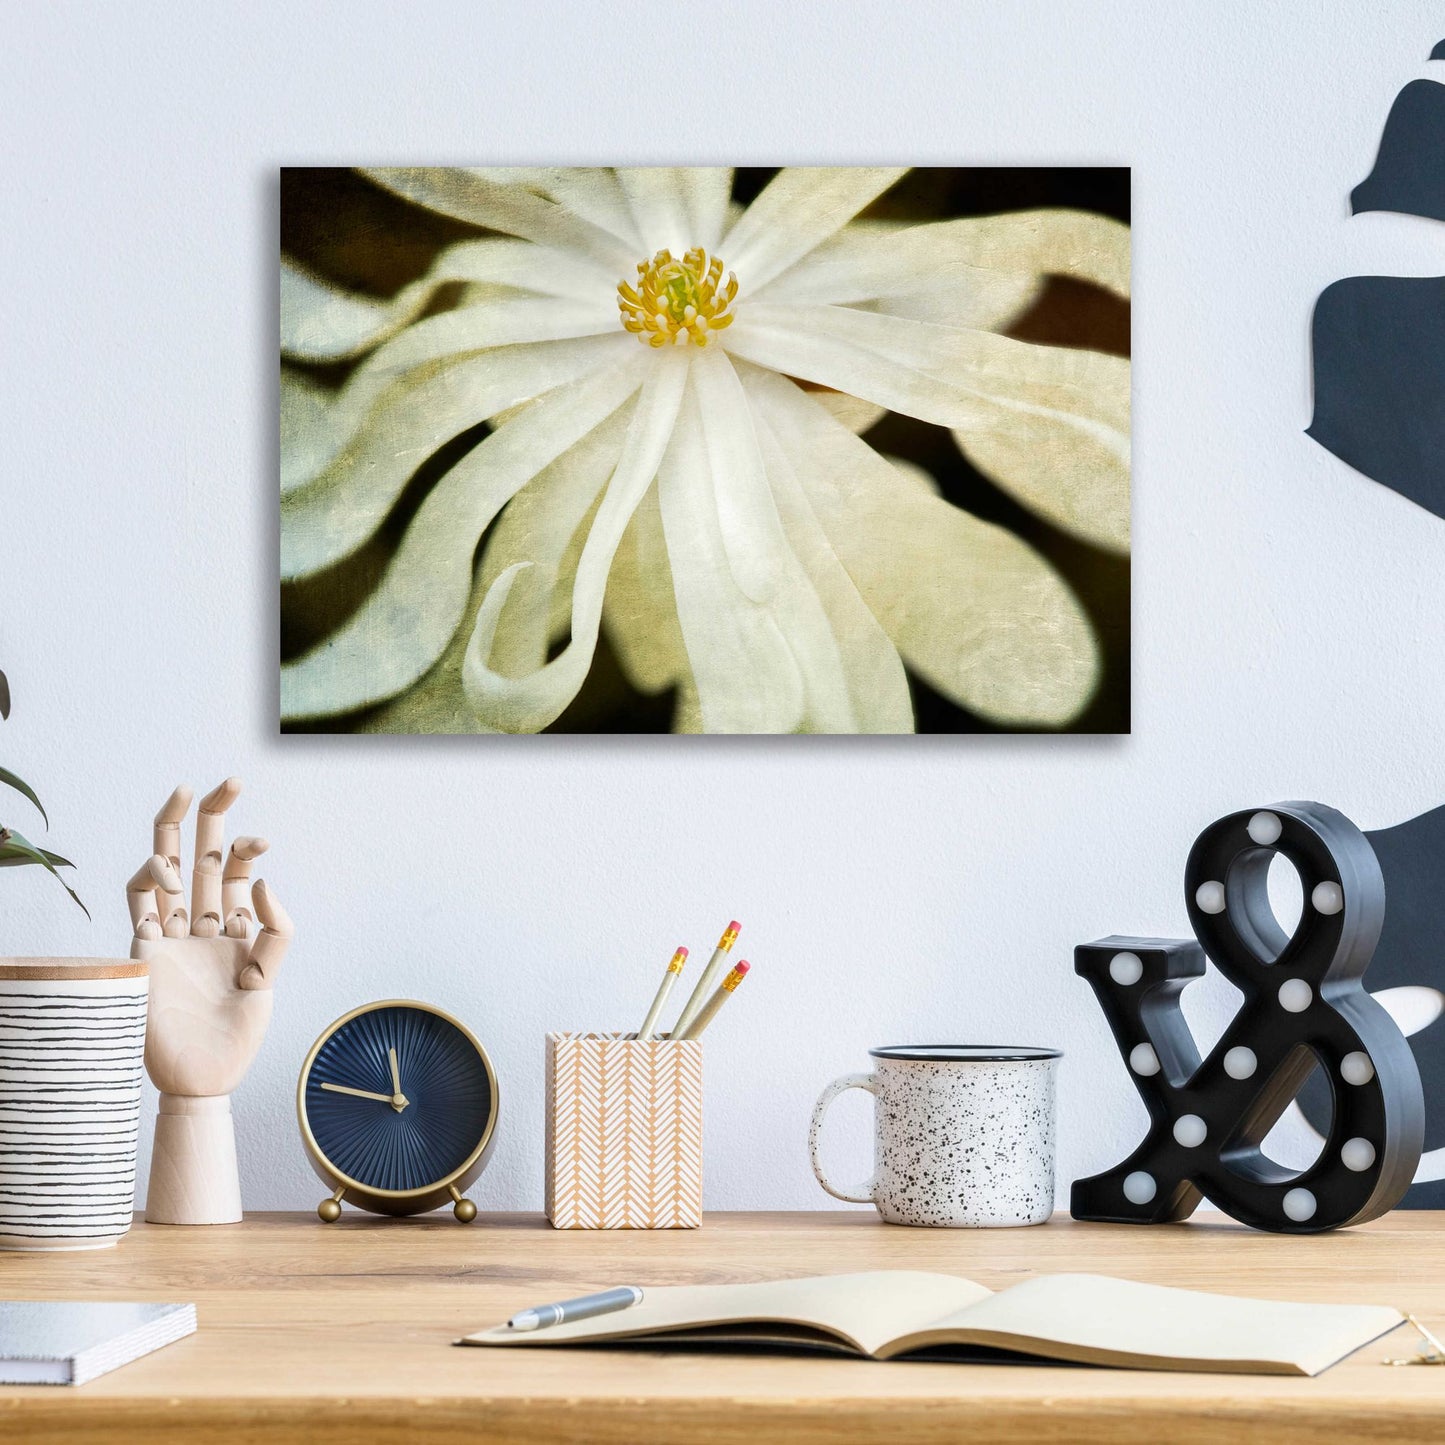 Epic Art 'White Flower' by Dennis Frates, Acrylic Glass Wall Art,16x12